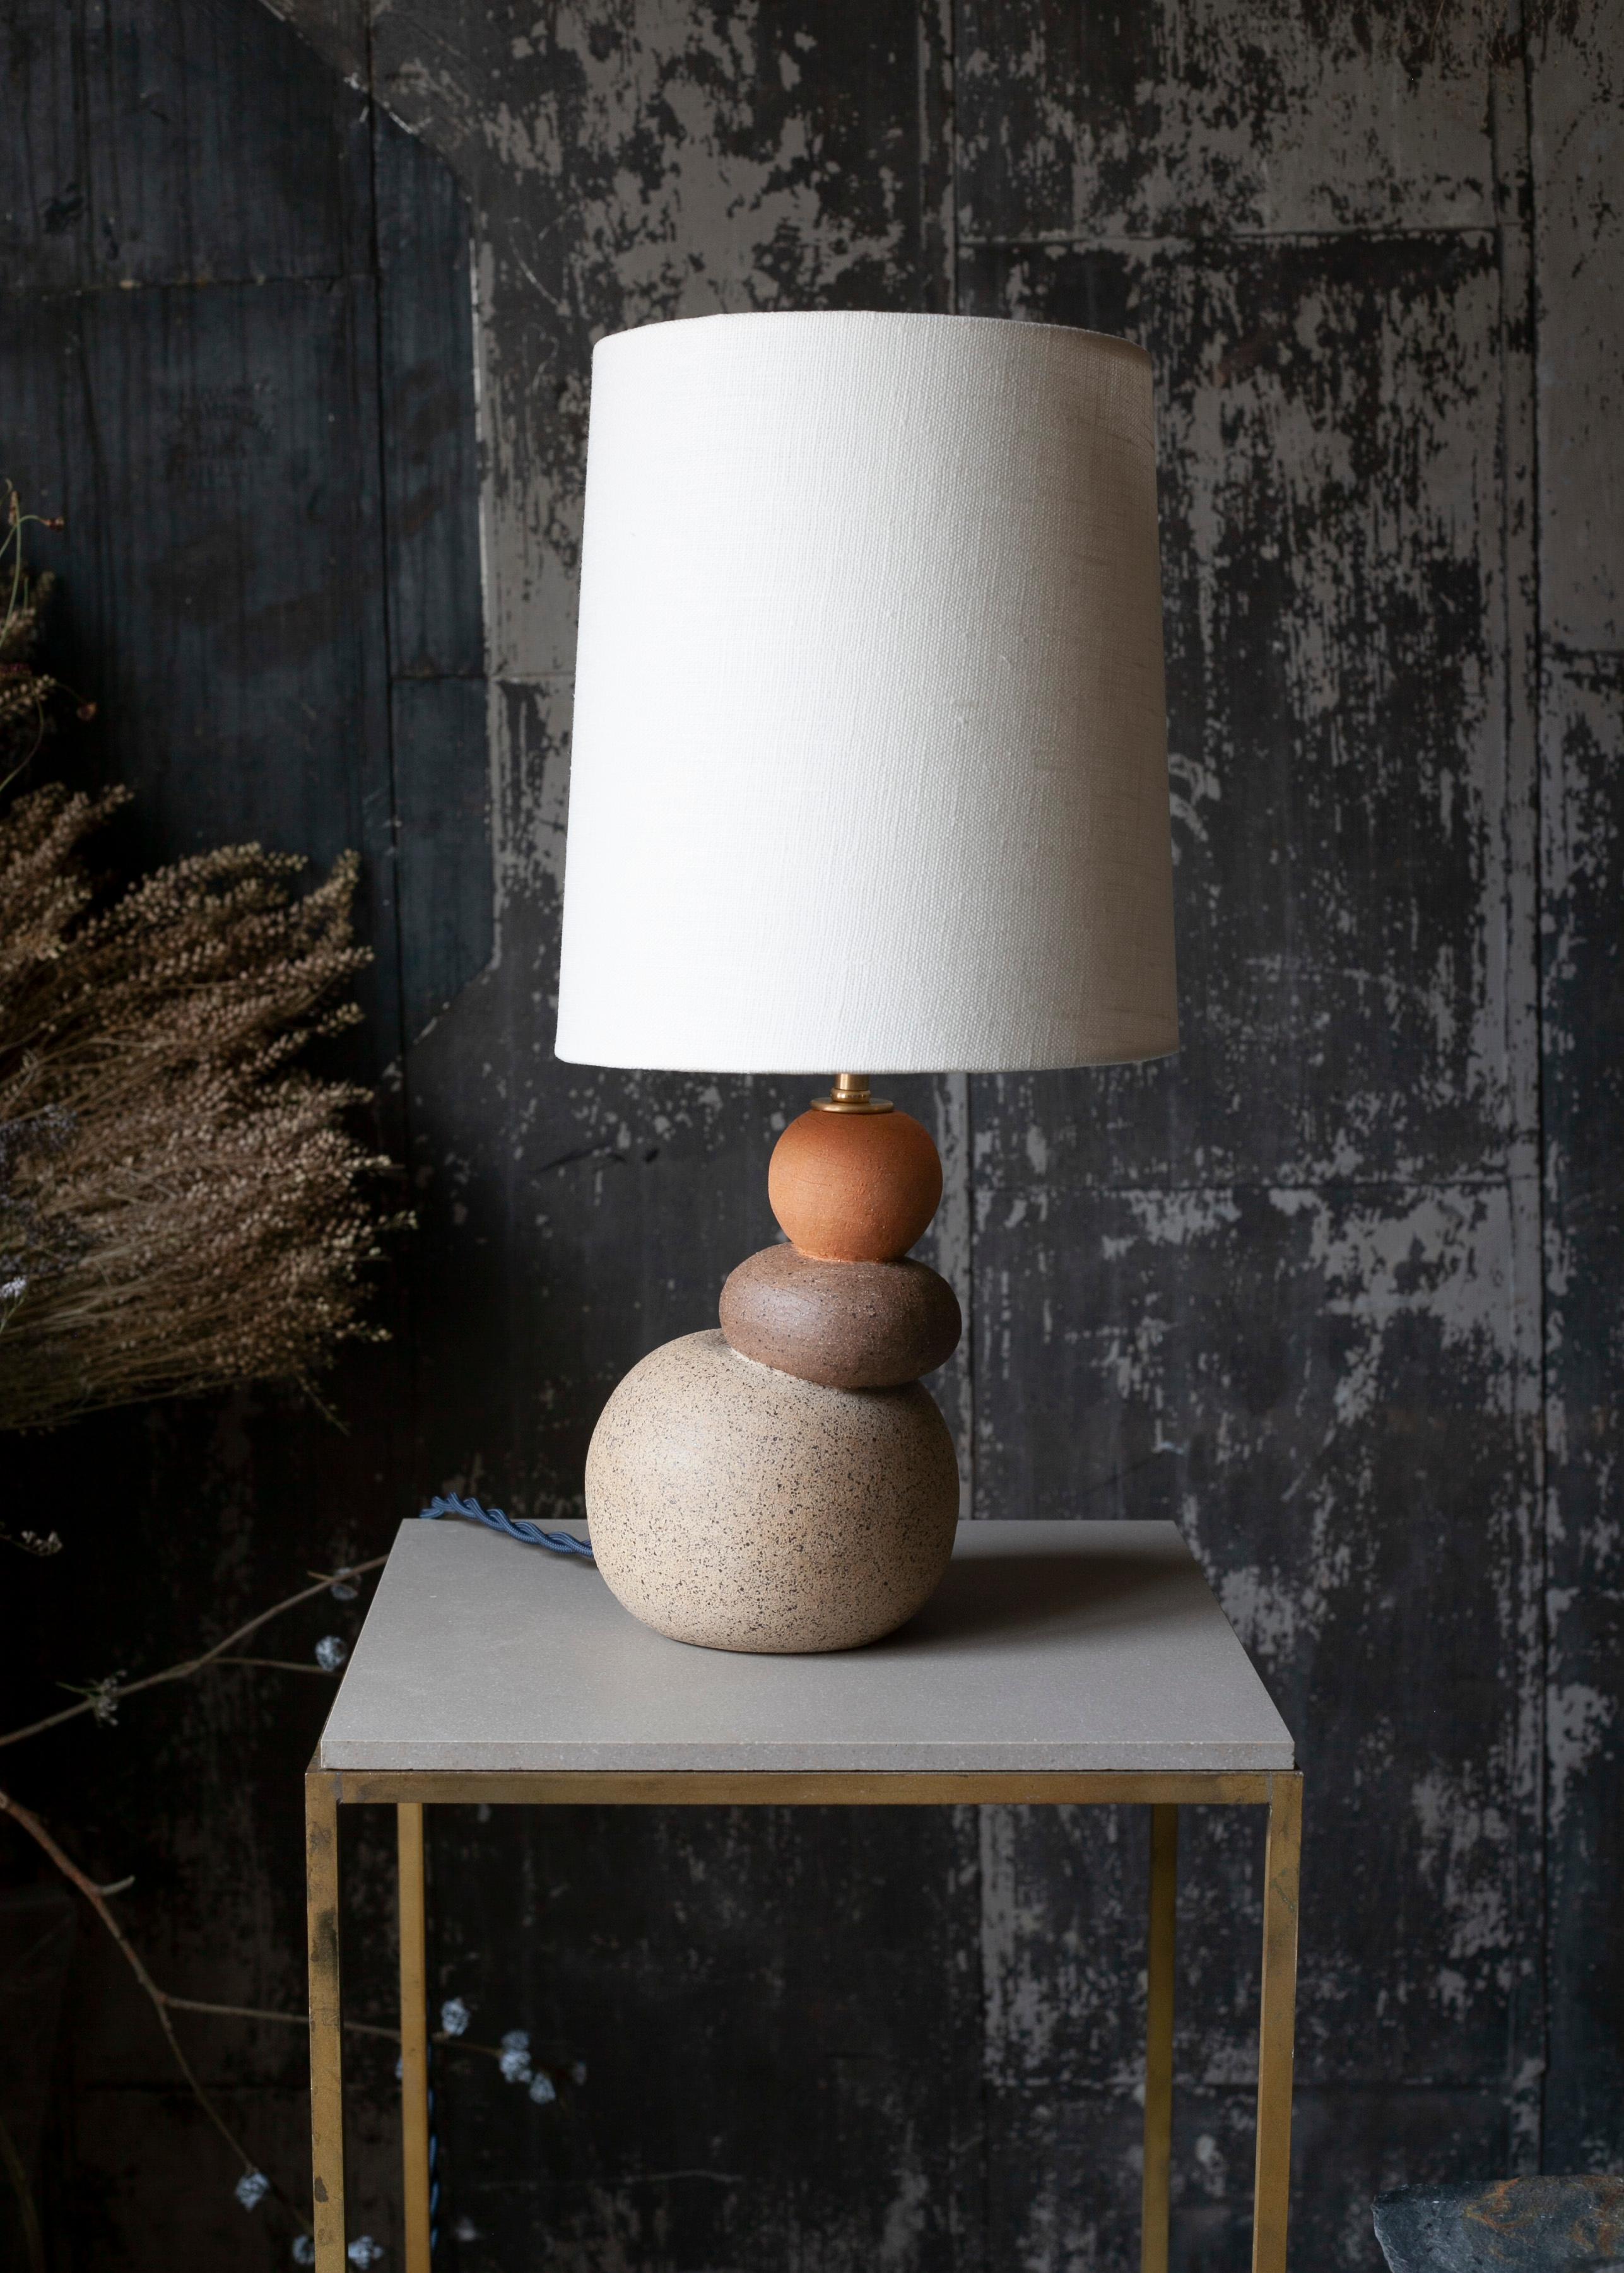 One of a kind ceramic lamp, thrown on the potters wheel and assembled by hand. The lamp base is comprised of three different clay bodies that celebrates the natural texture of unglazed ceramic. This piece was inspired by seashells and smooth stones